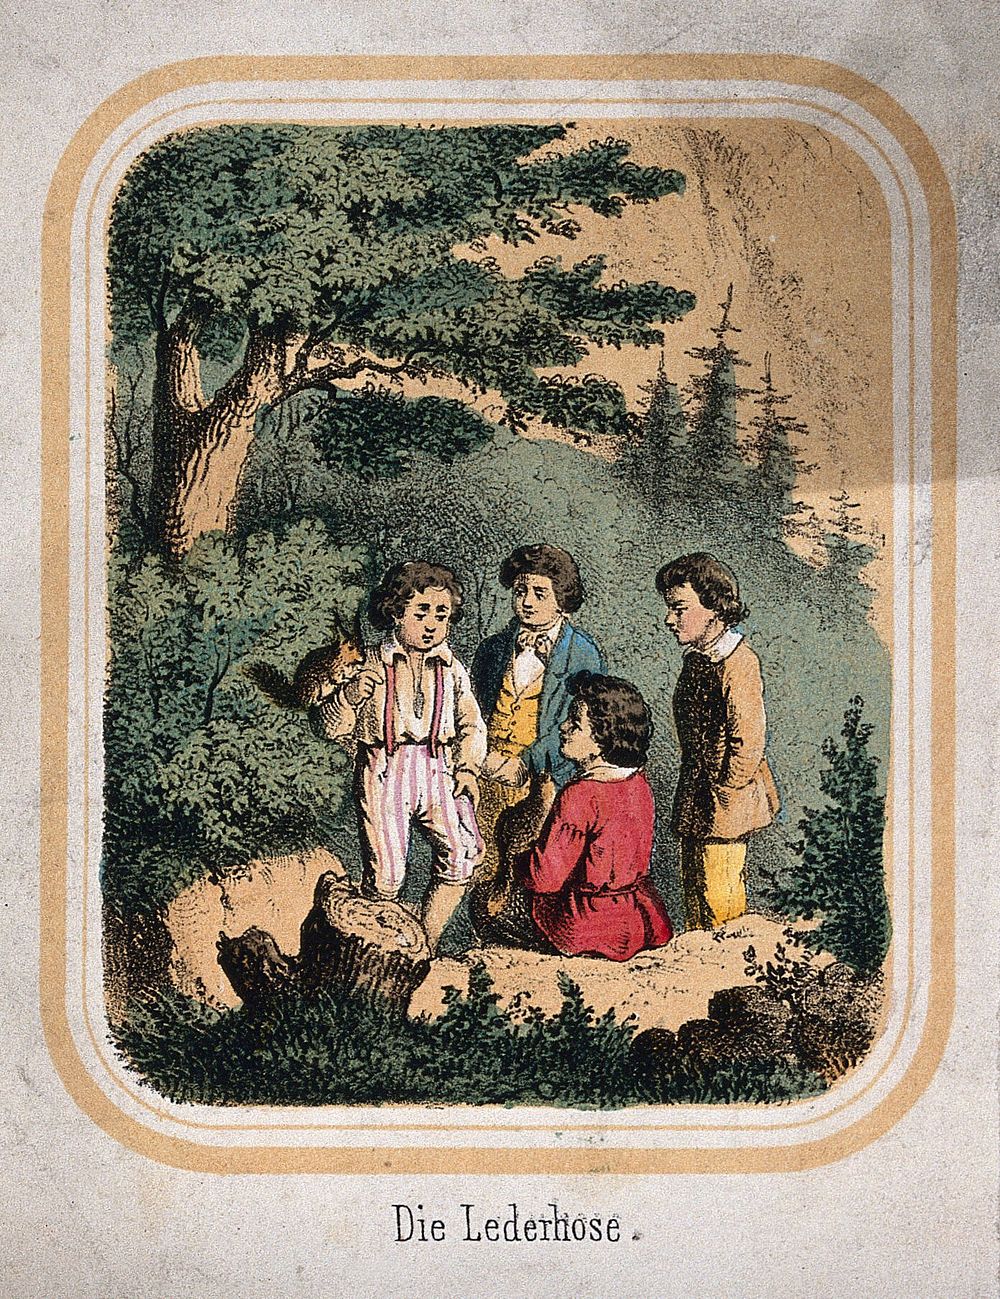 A group of boys are sitting on rocks, two of them have squirrels with them. Coloured lithograph.